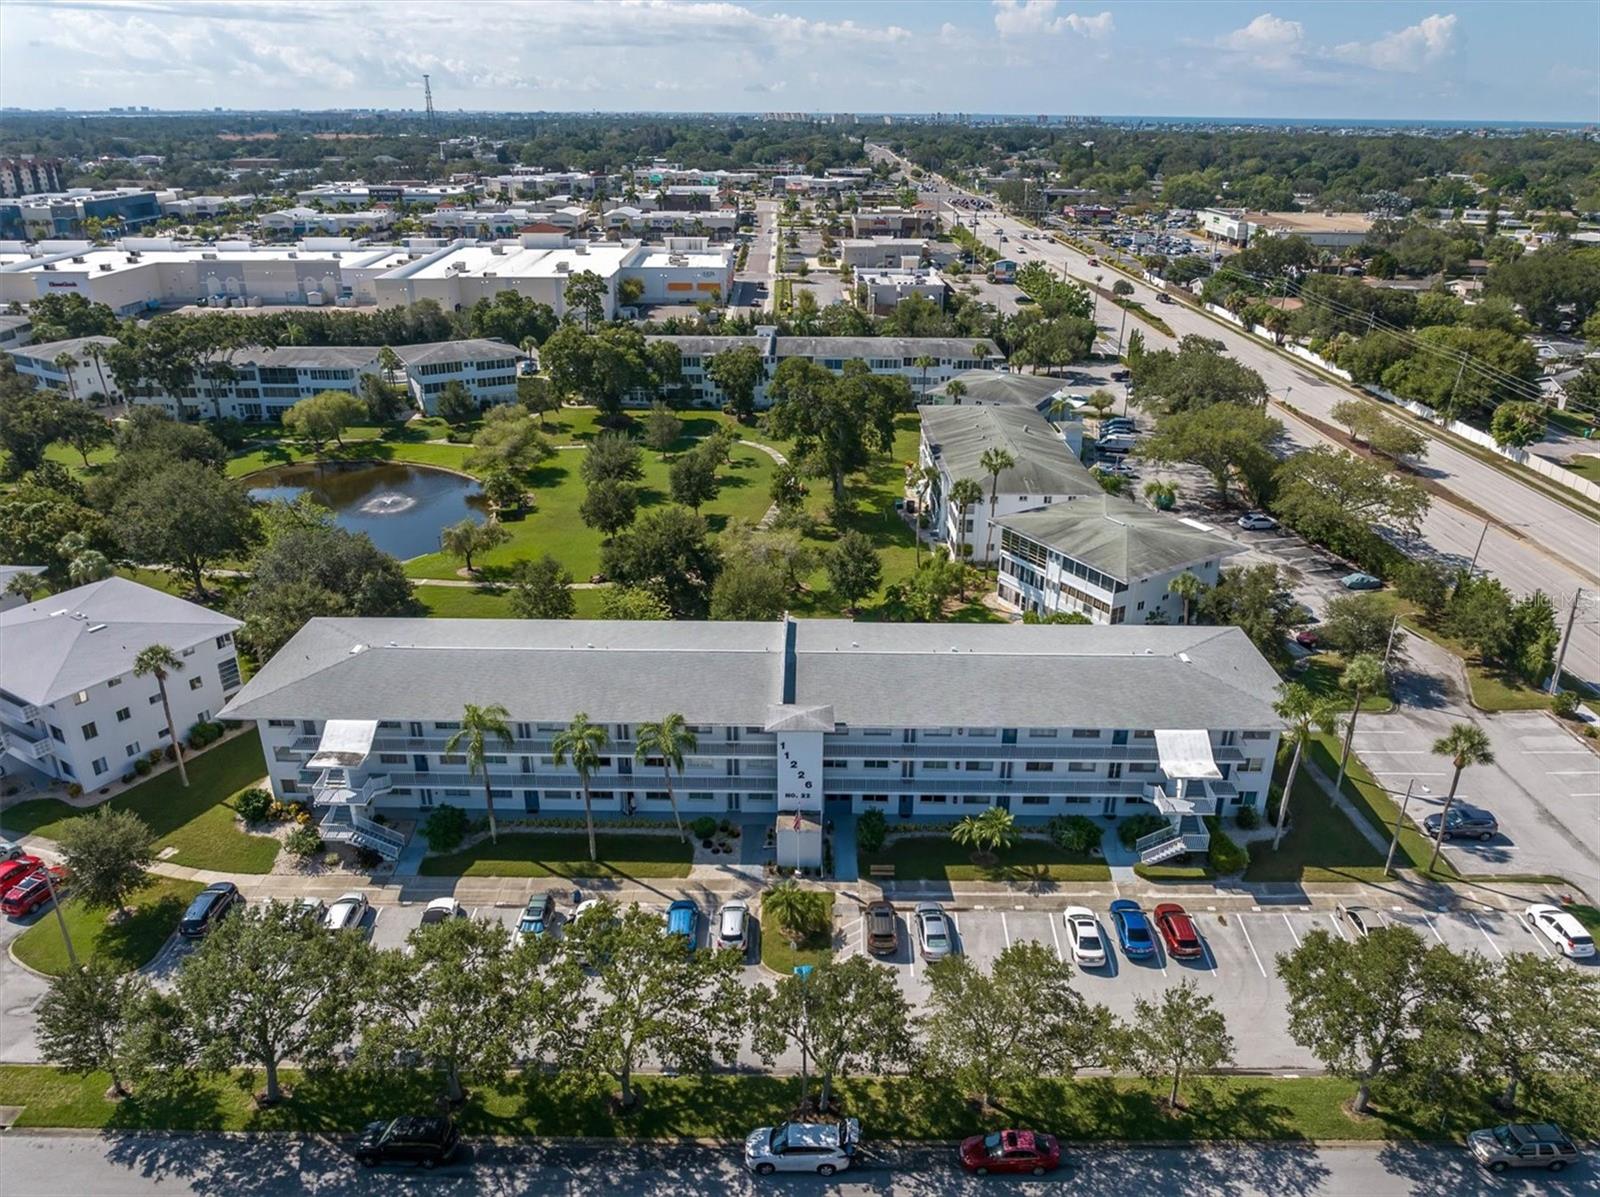 Front of building 22. Seminole City Center in background (giant white roofs back left in the frame). And, see that giant road to the right of the building? That's 113th St and it goes straight down to the beaches, Madeira Beach specifically, which is only 4 miles away.